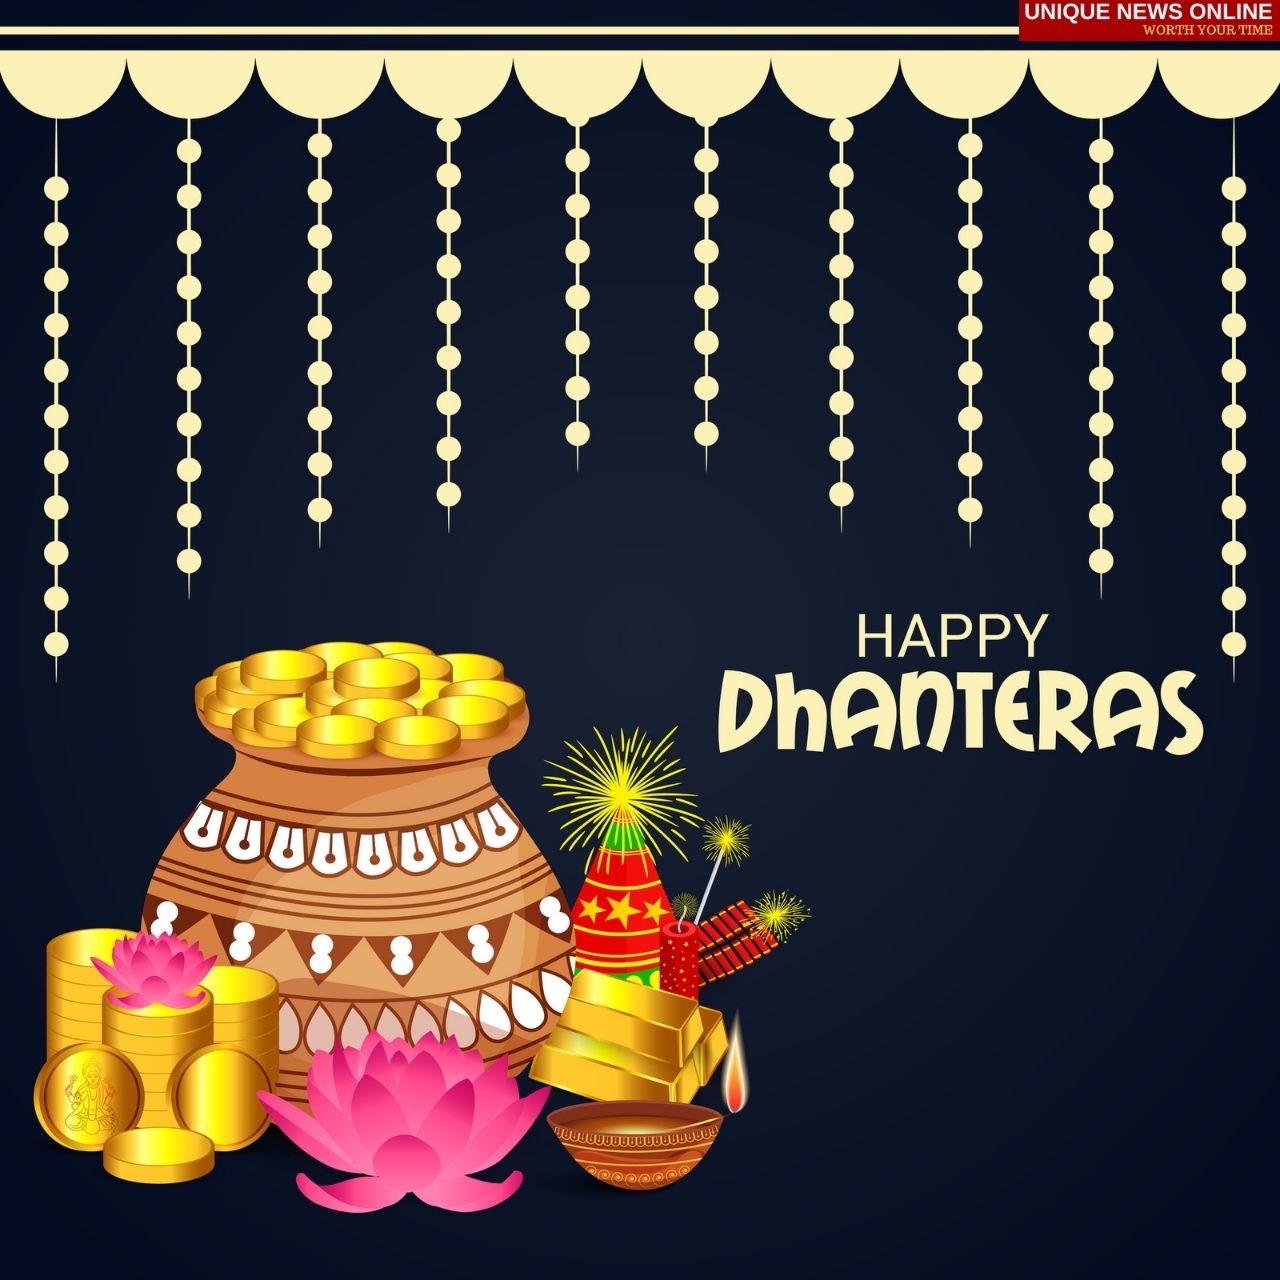 Dhanteras 2021 WhatsApp Status Video to Download for Free